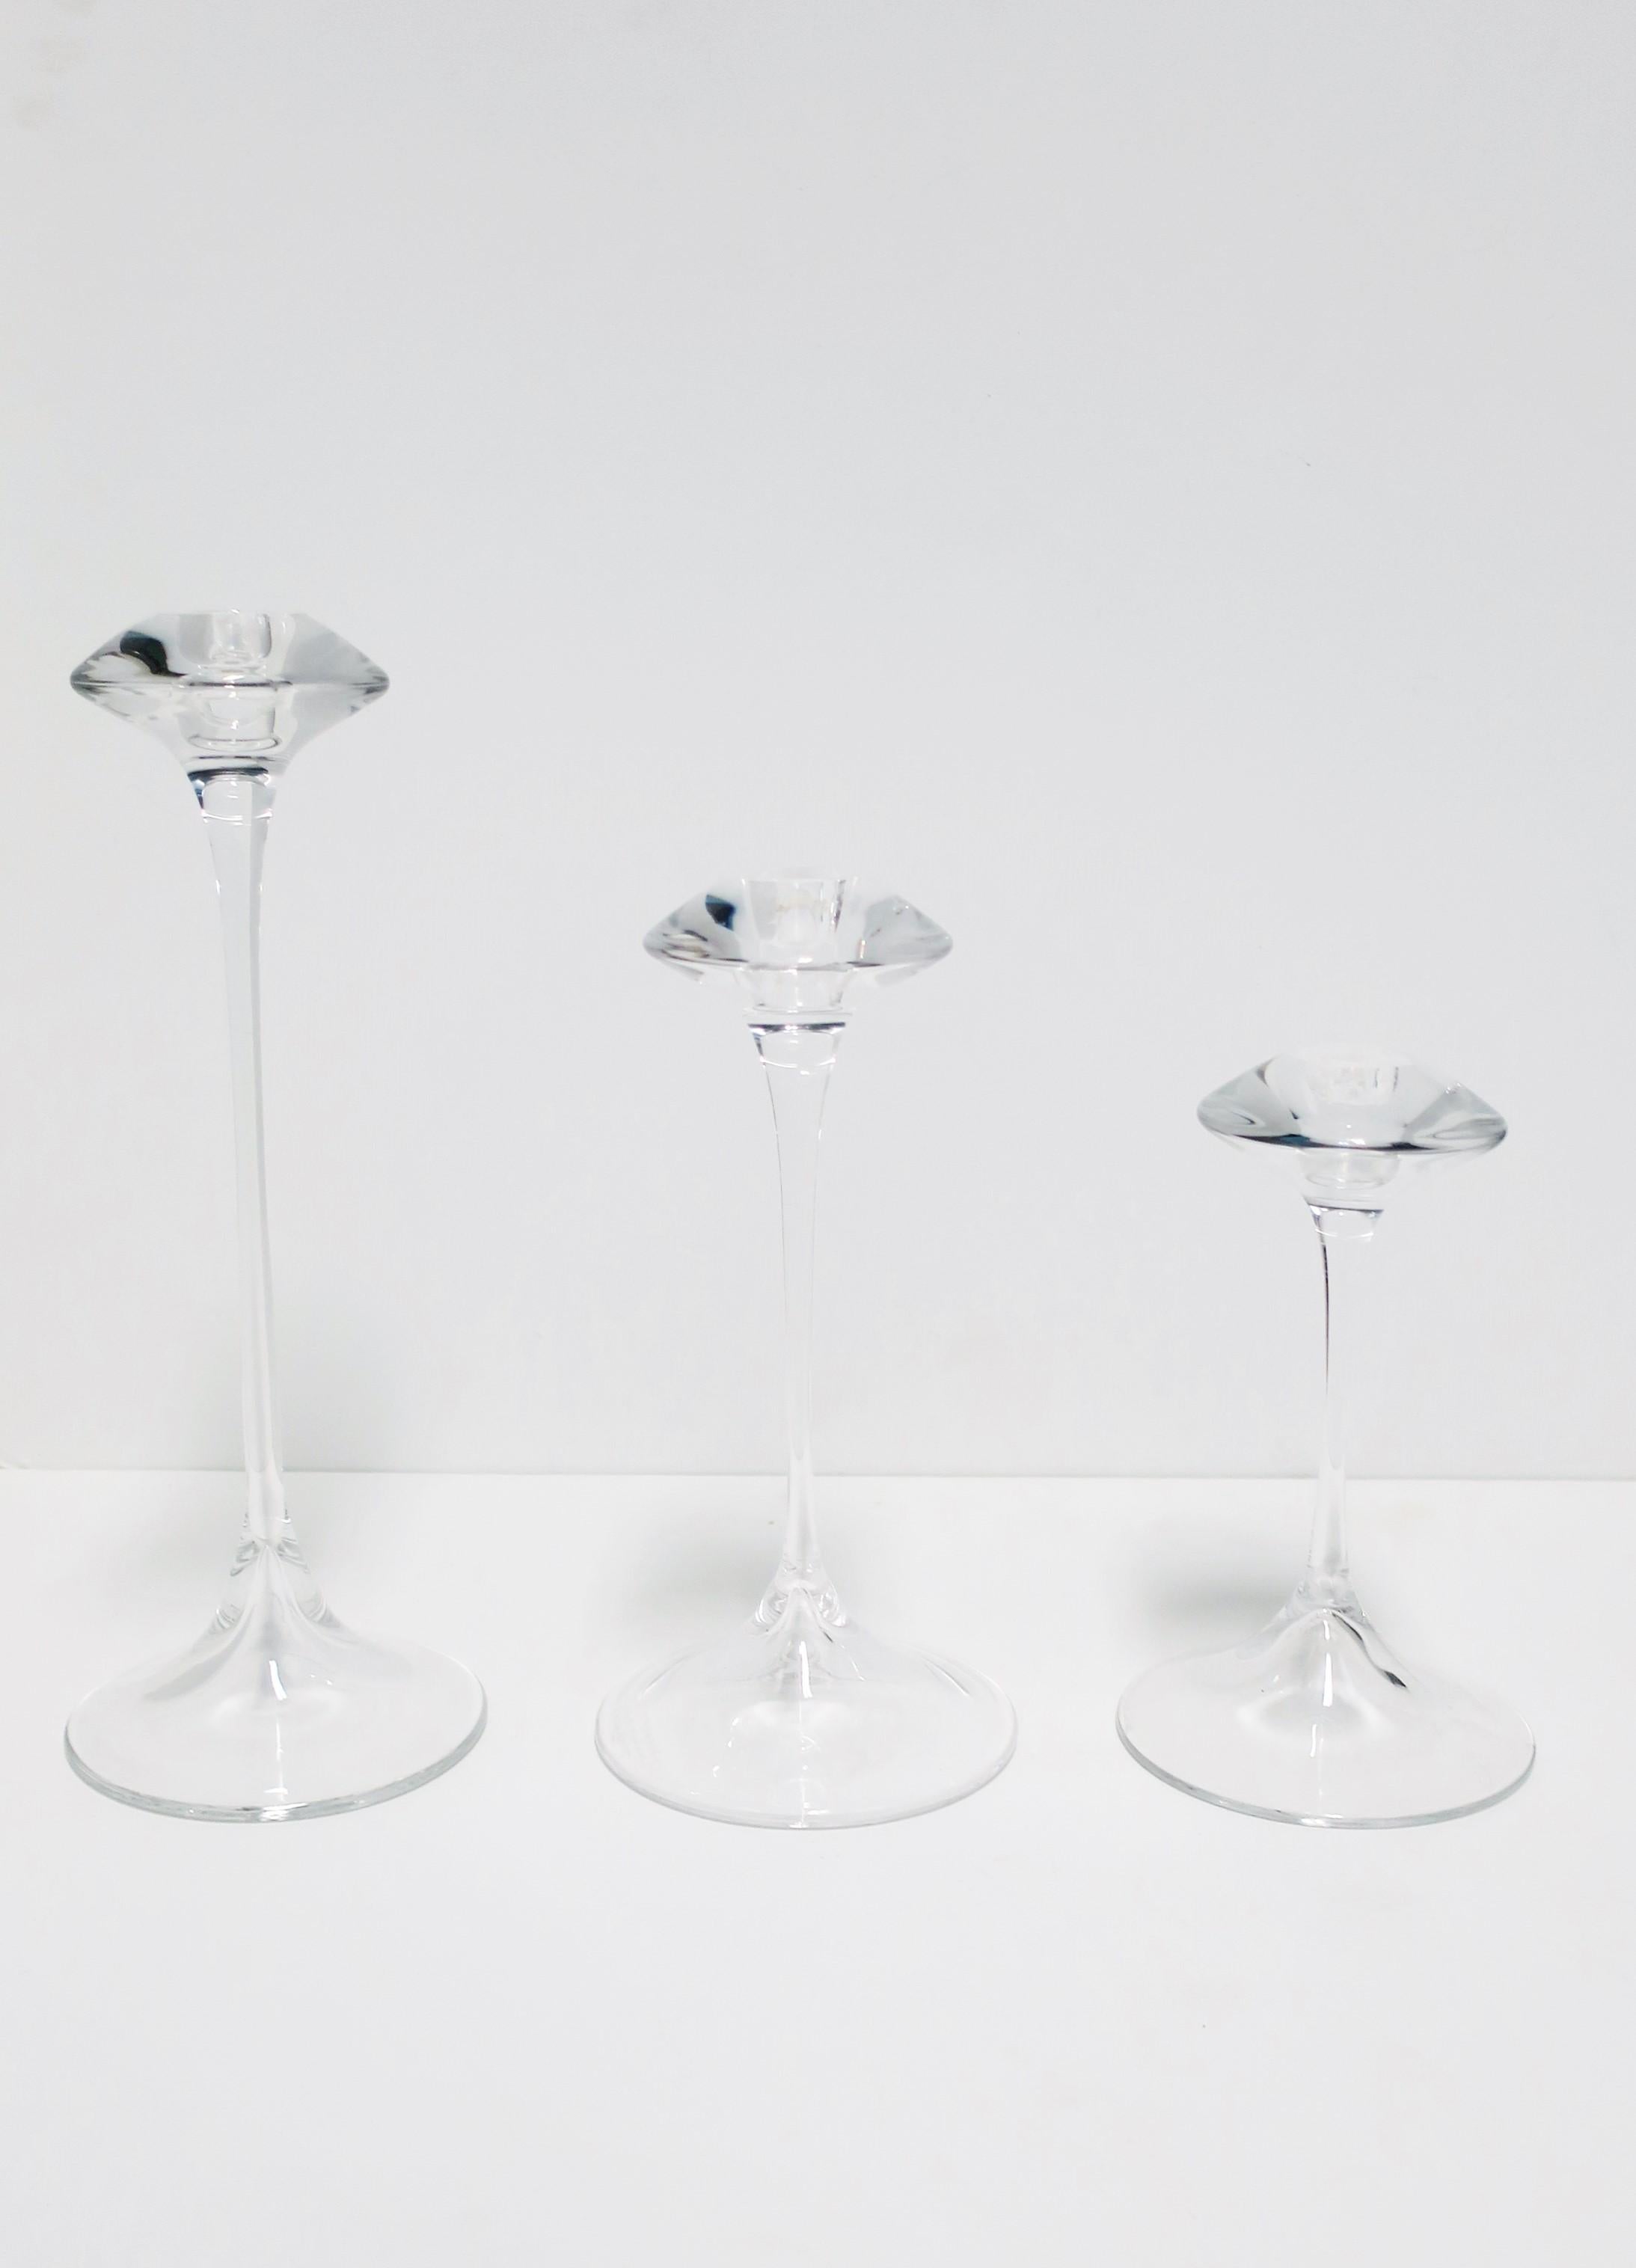 A beautiful set of three (3) of Scandinavian Modern clear crystal candlestick holders by designer Kjell Engman for Kosta Boda, Sweden. With maker's mark, designers' signature, and numbered on underside of all three as shown in images #14, 15 and 16.